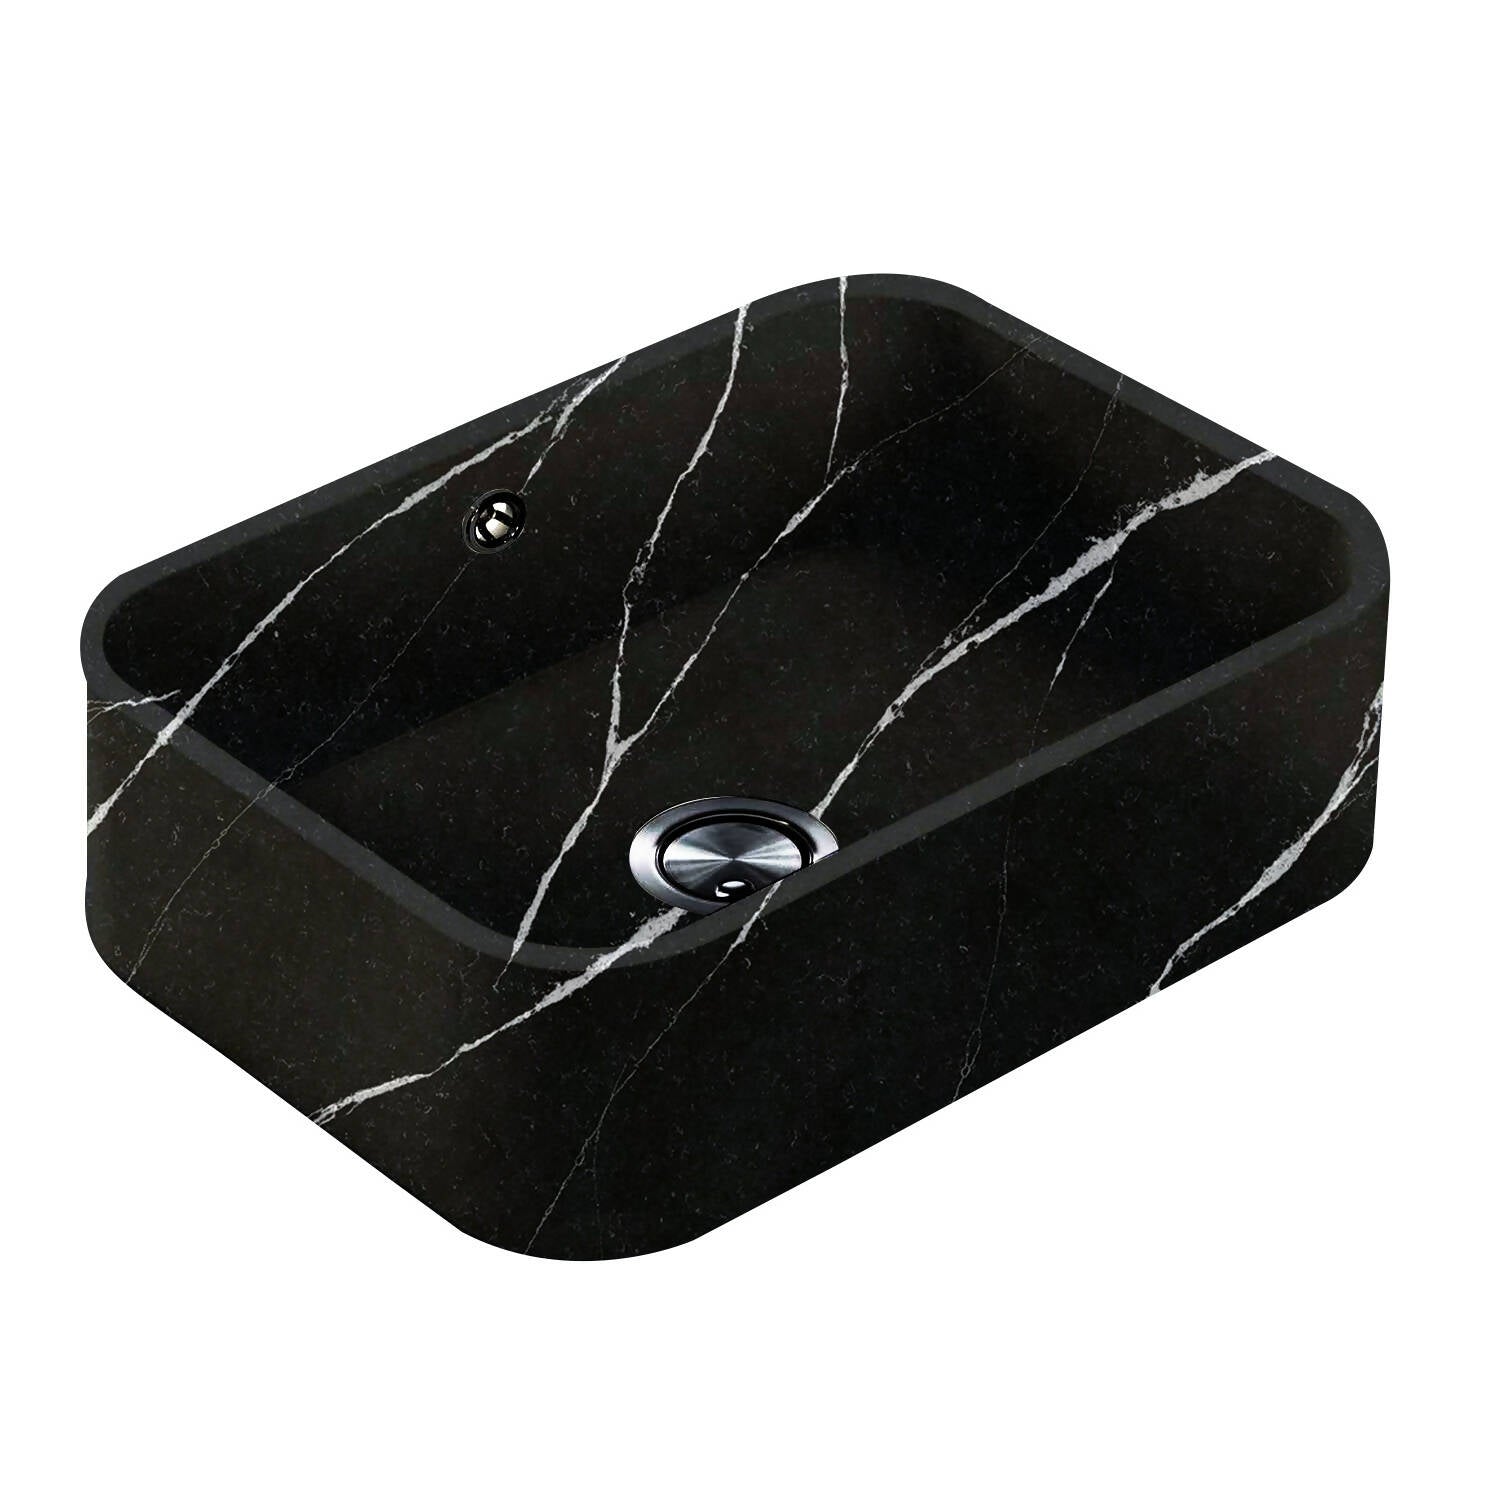 ET. Marquina Integrity Sink Available in the UK | Black Silestone